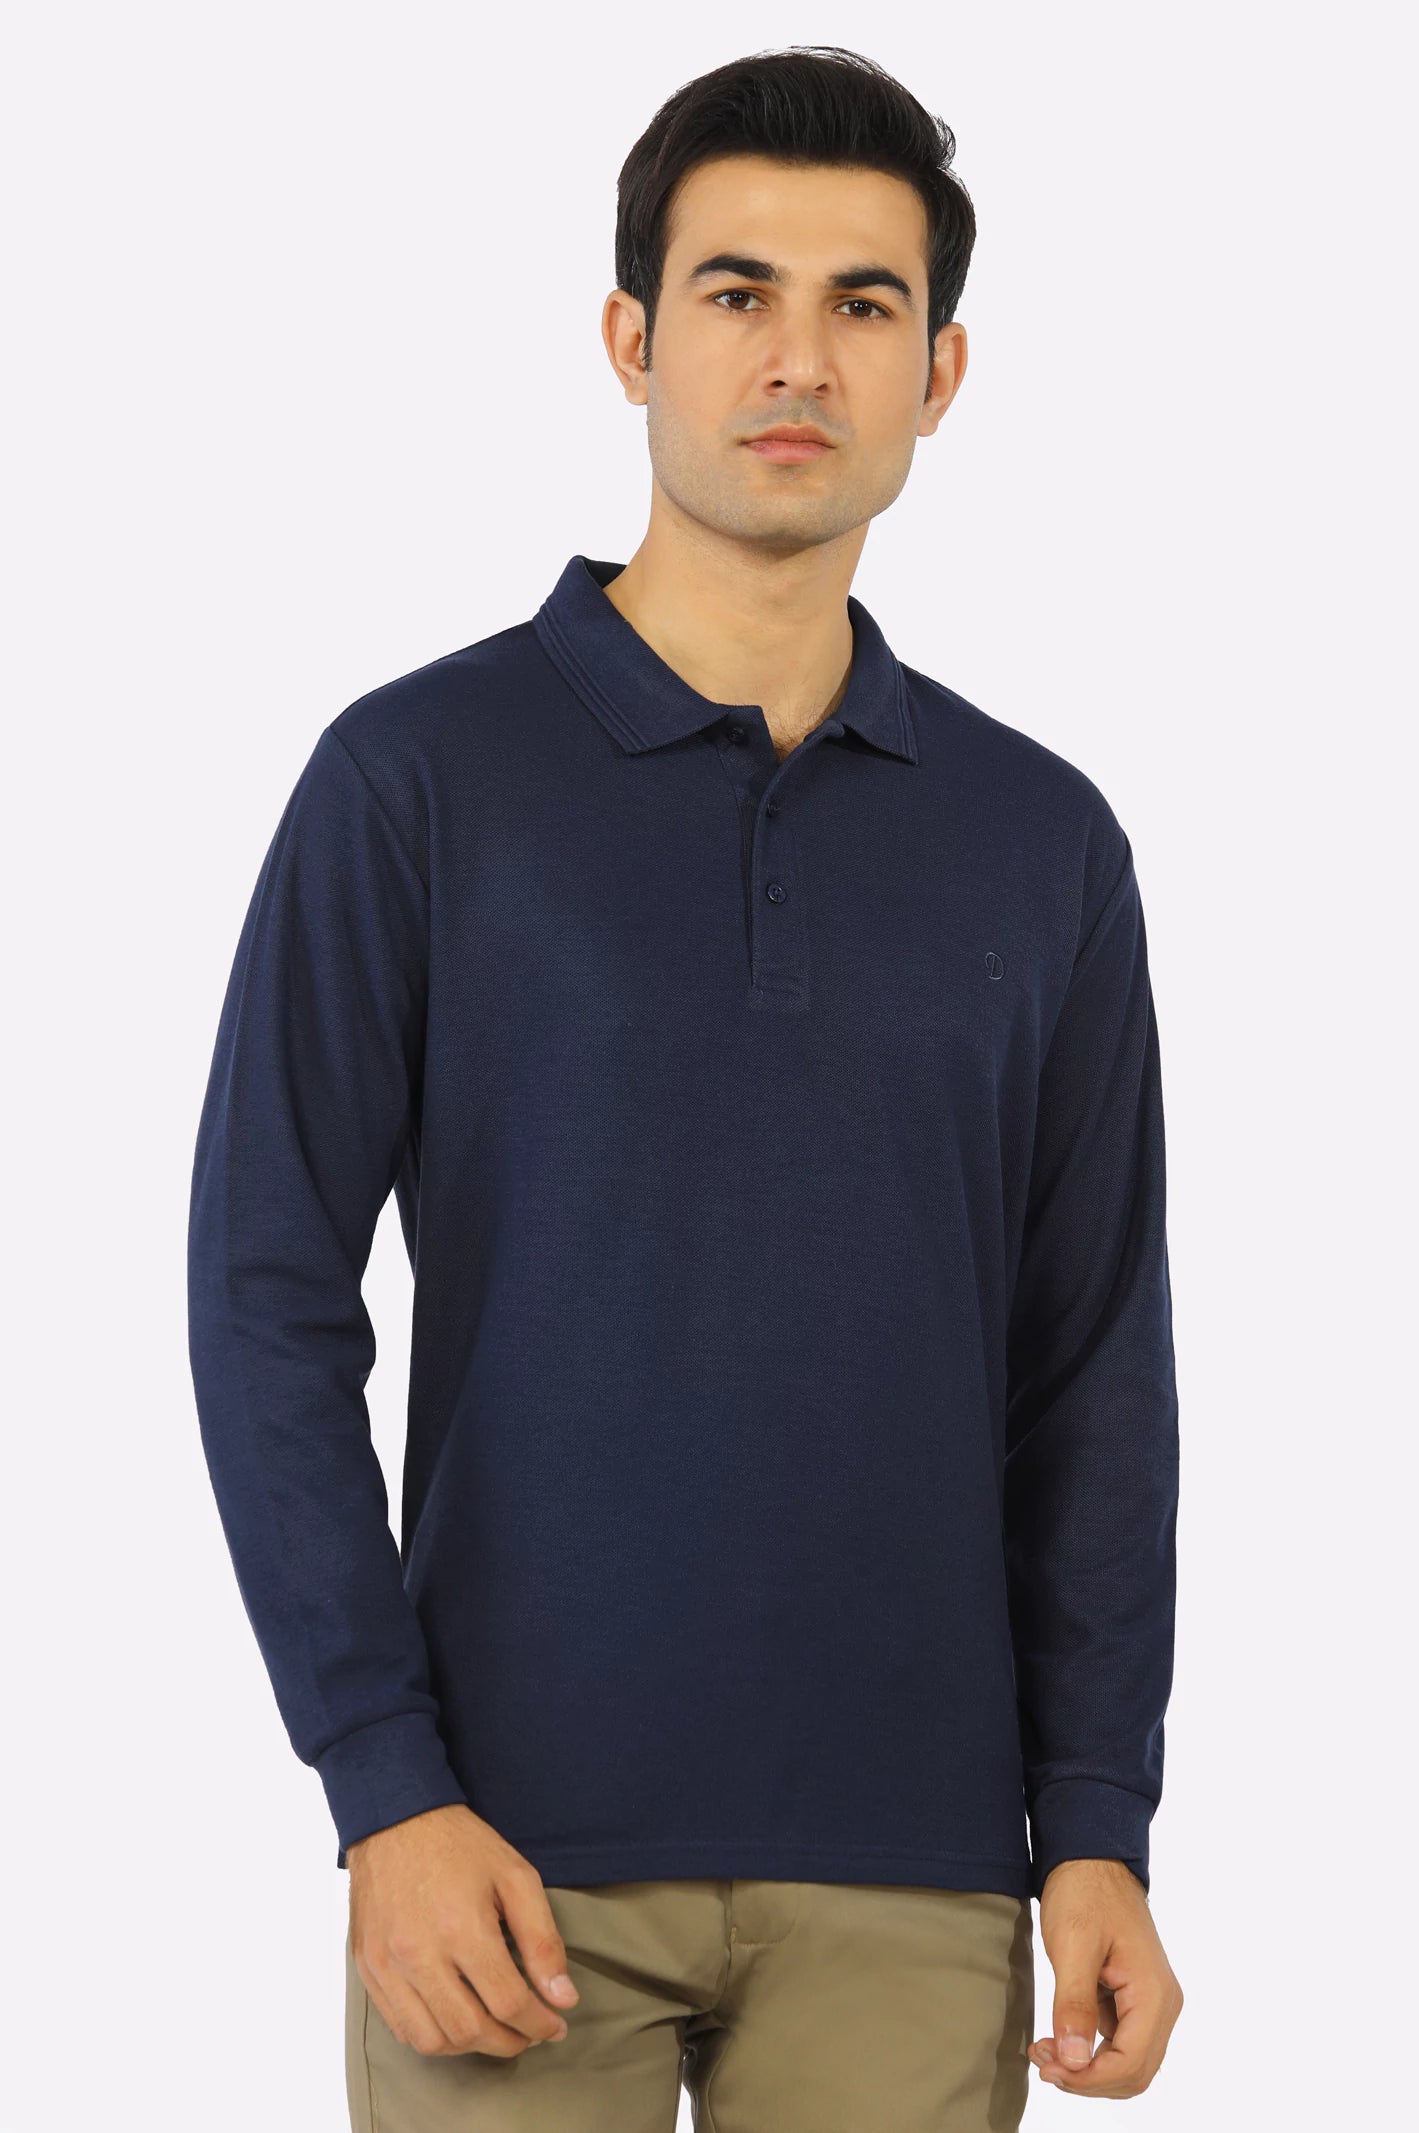 Navy Blue Long Sleeves Polo From Diners